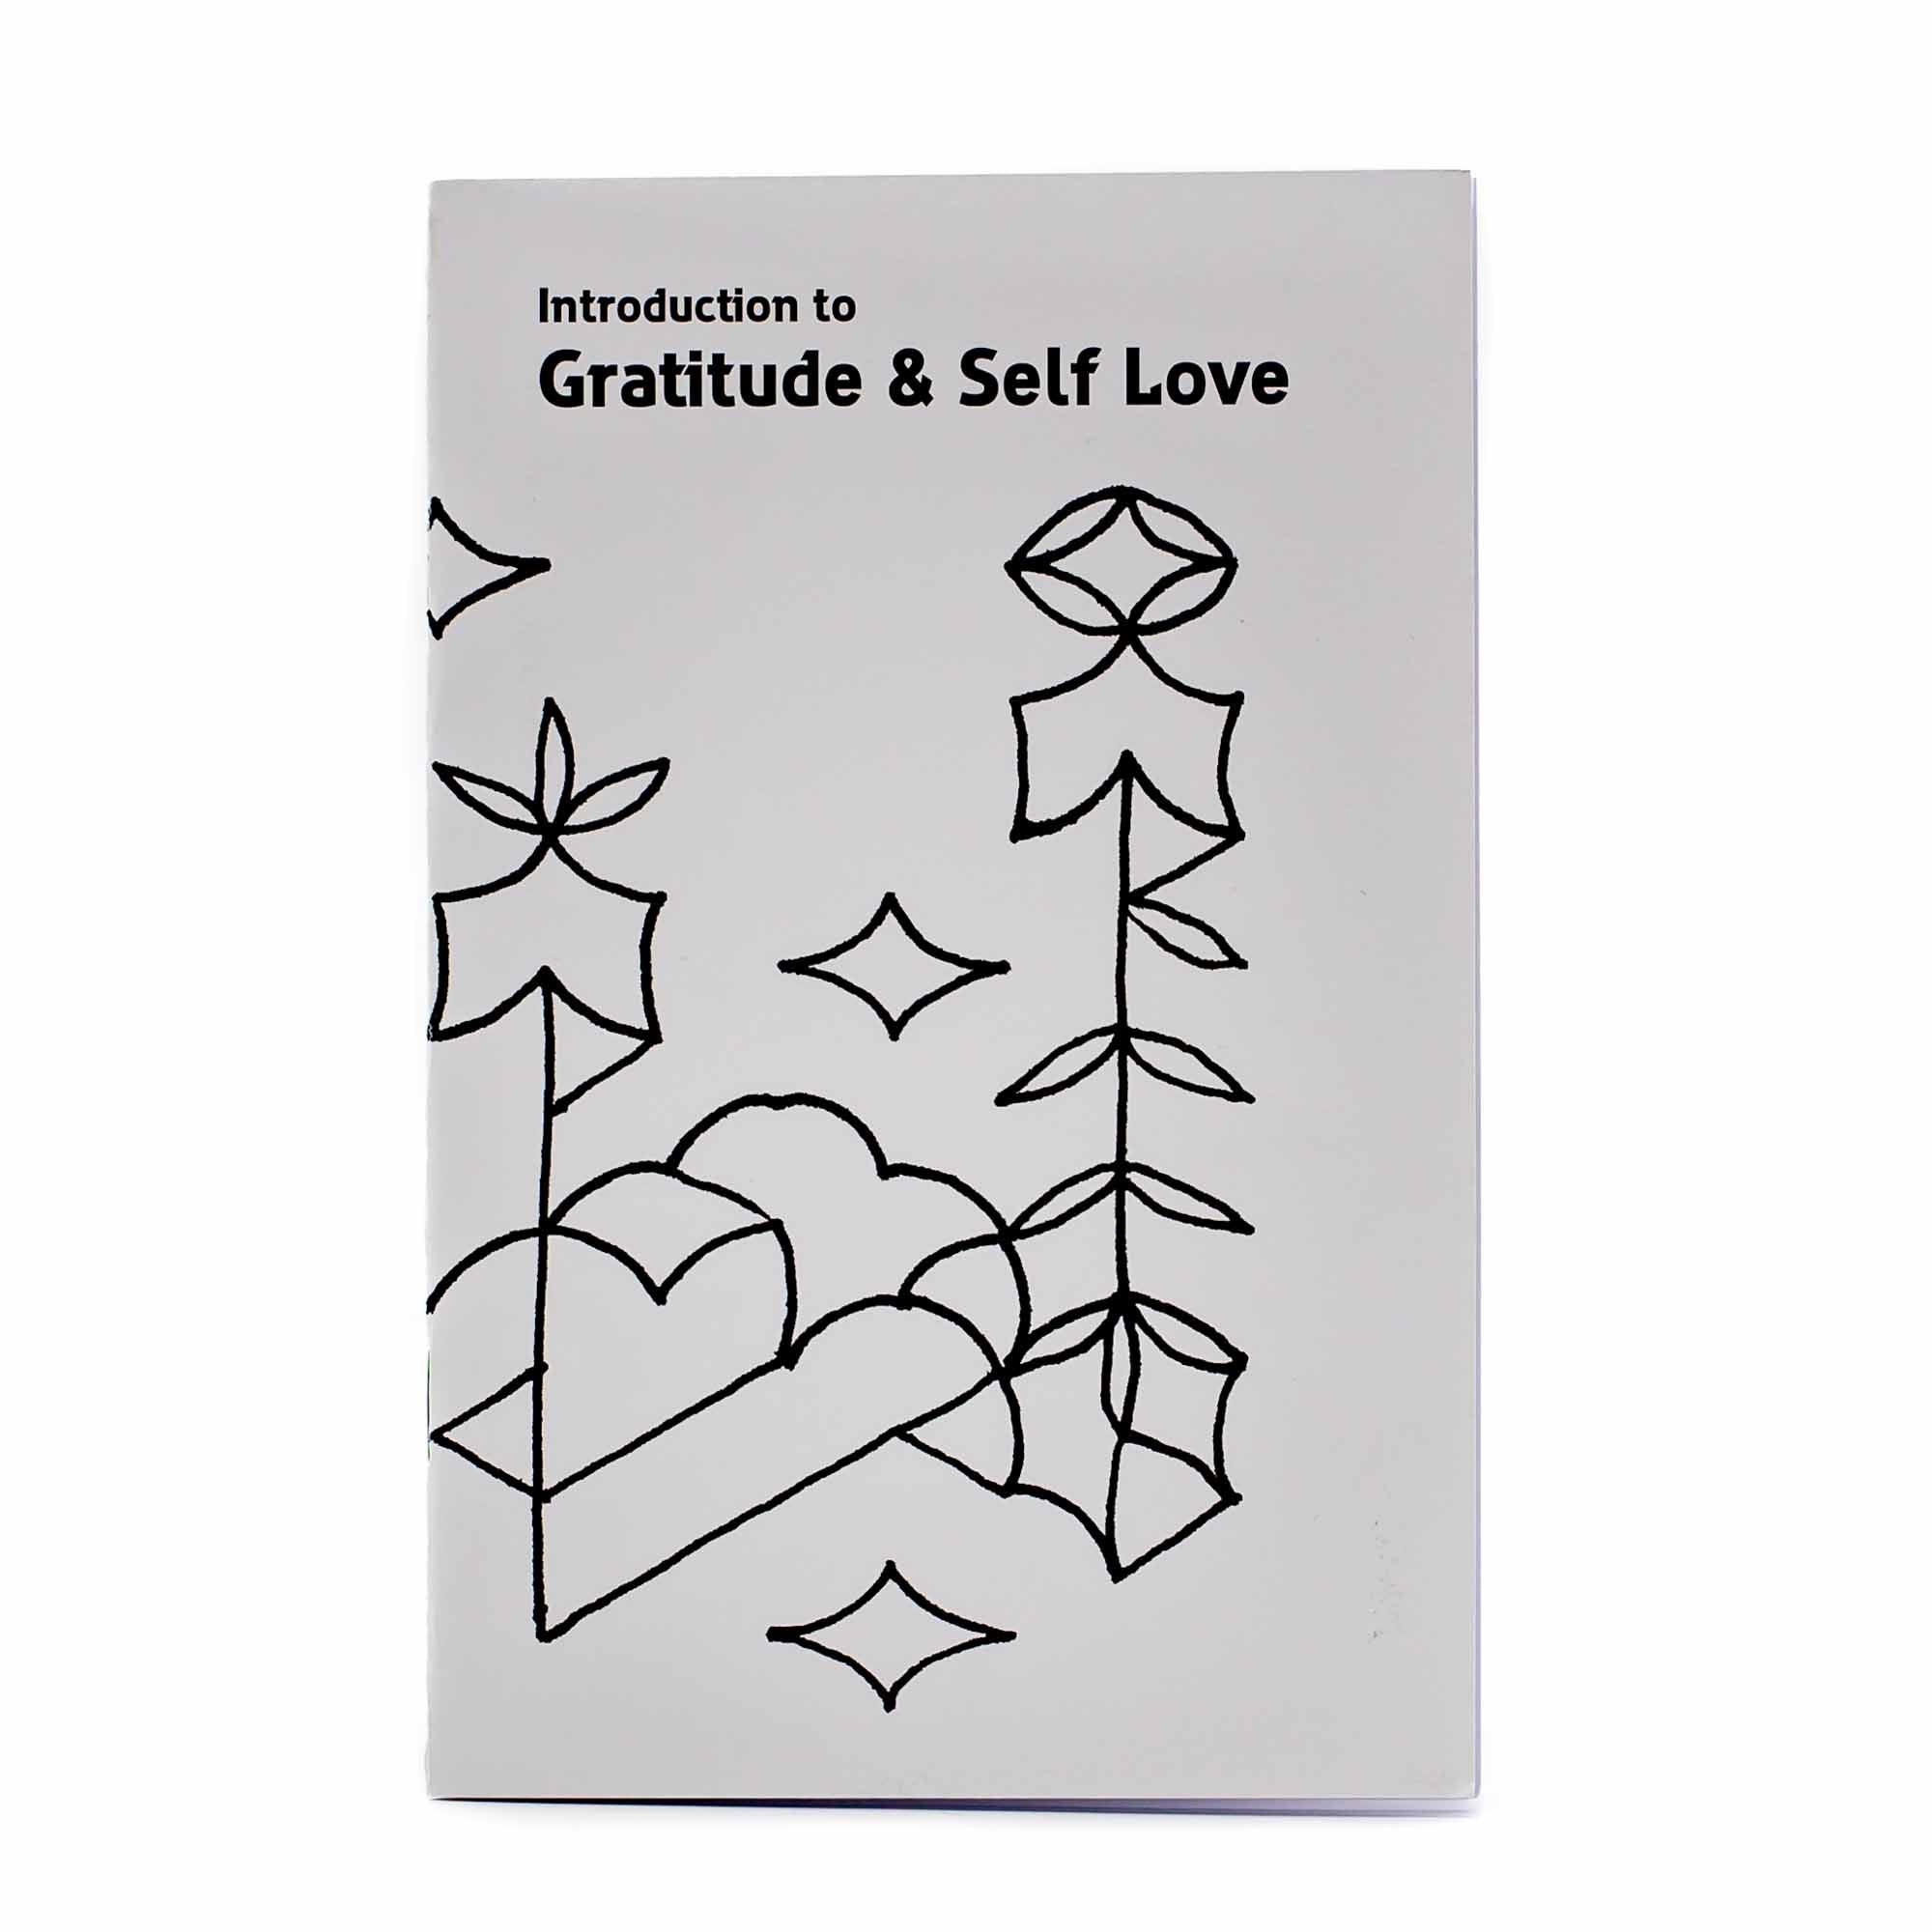 Introduction to Gratitude & Self Love - Mortise And Tenon